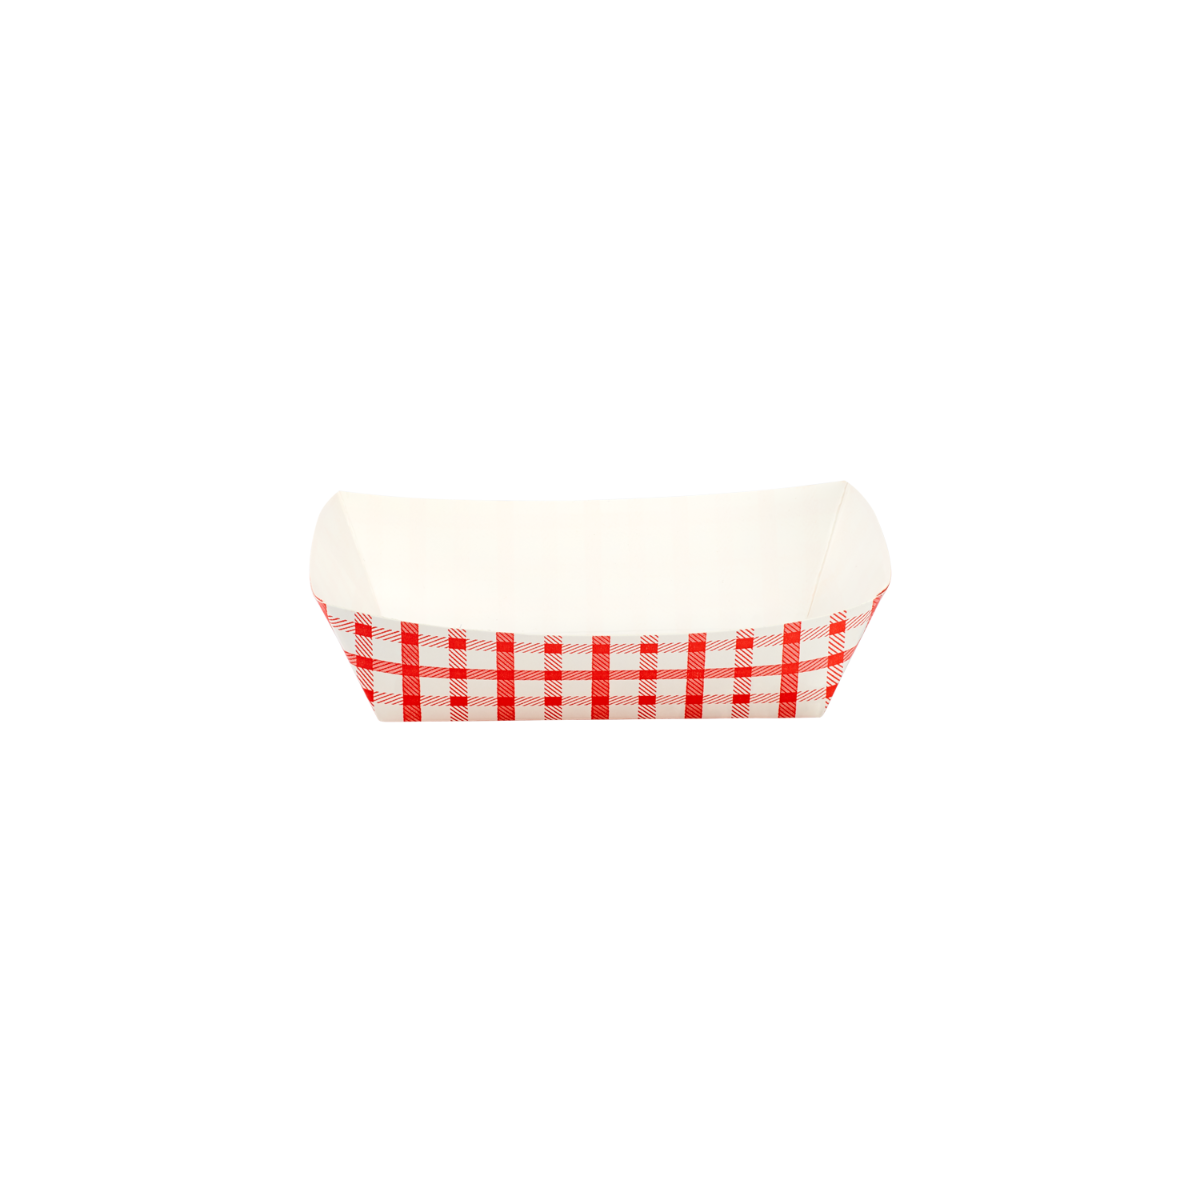 Red and White Karat 2.0 lb Food Tray